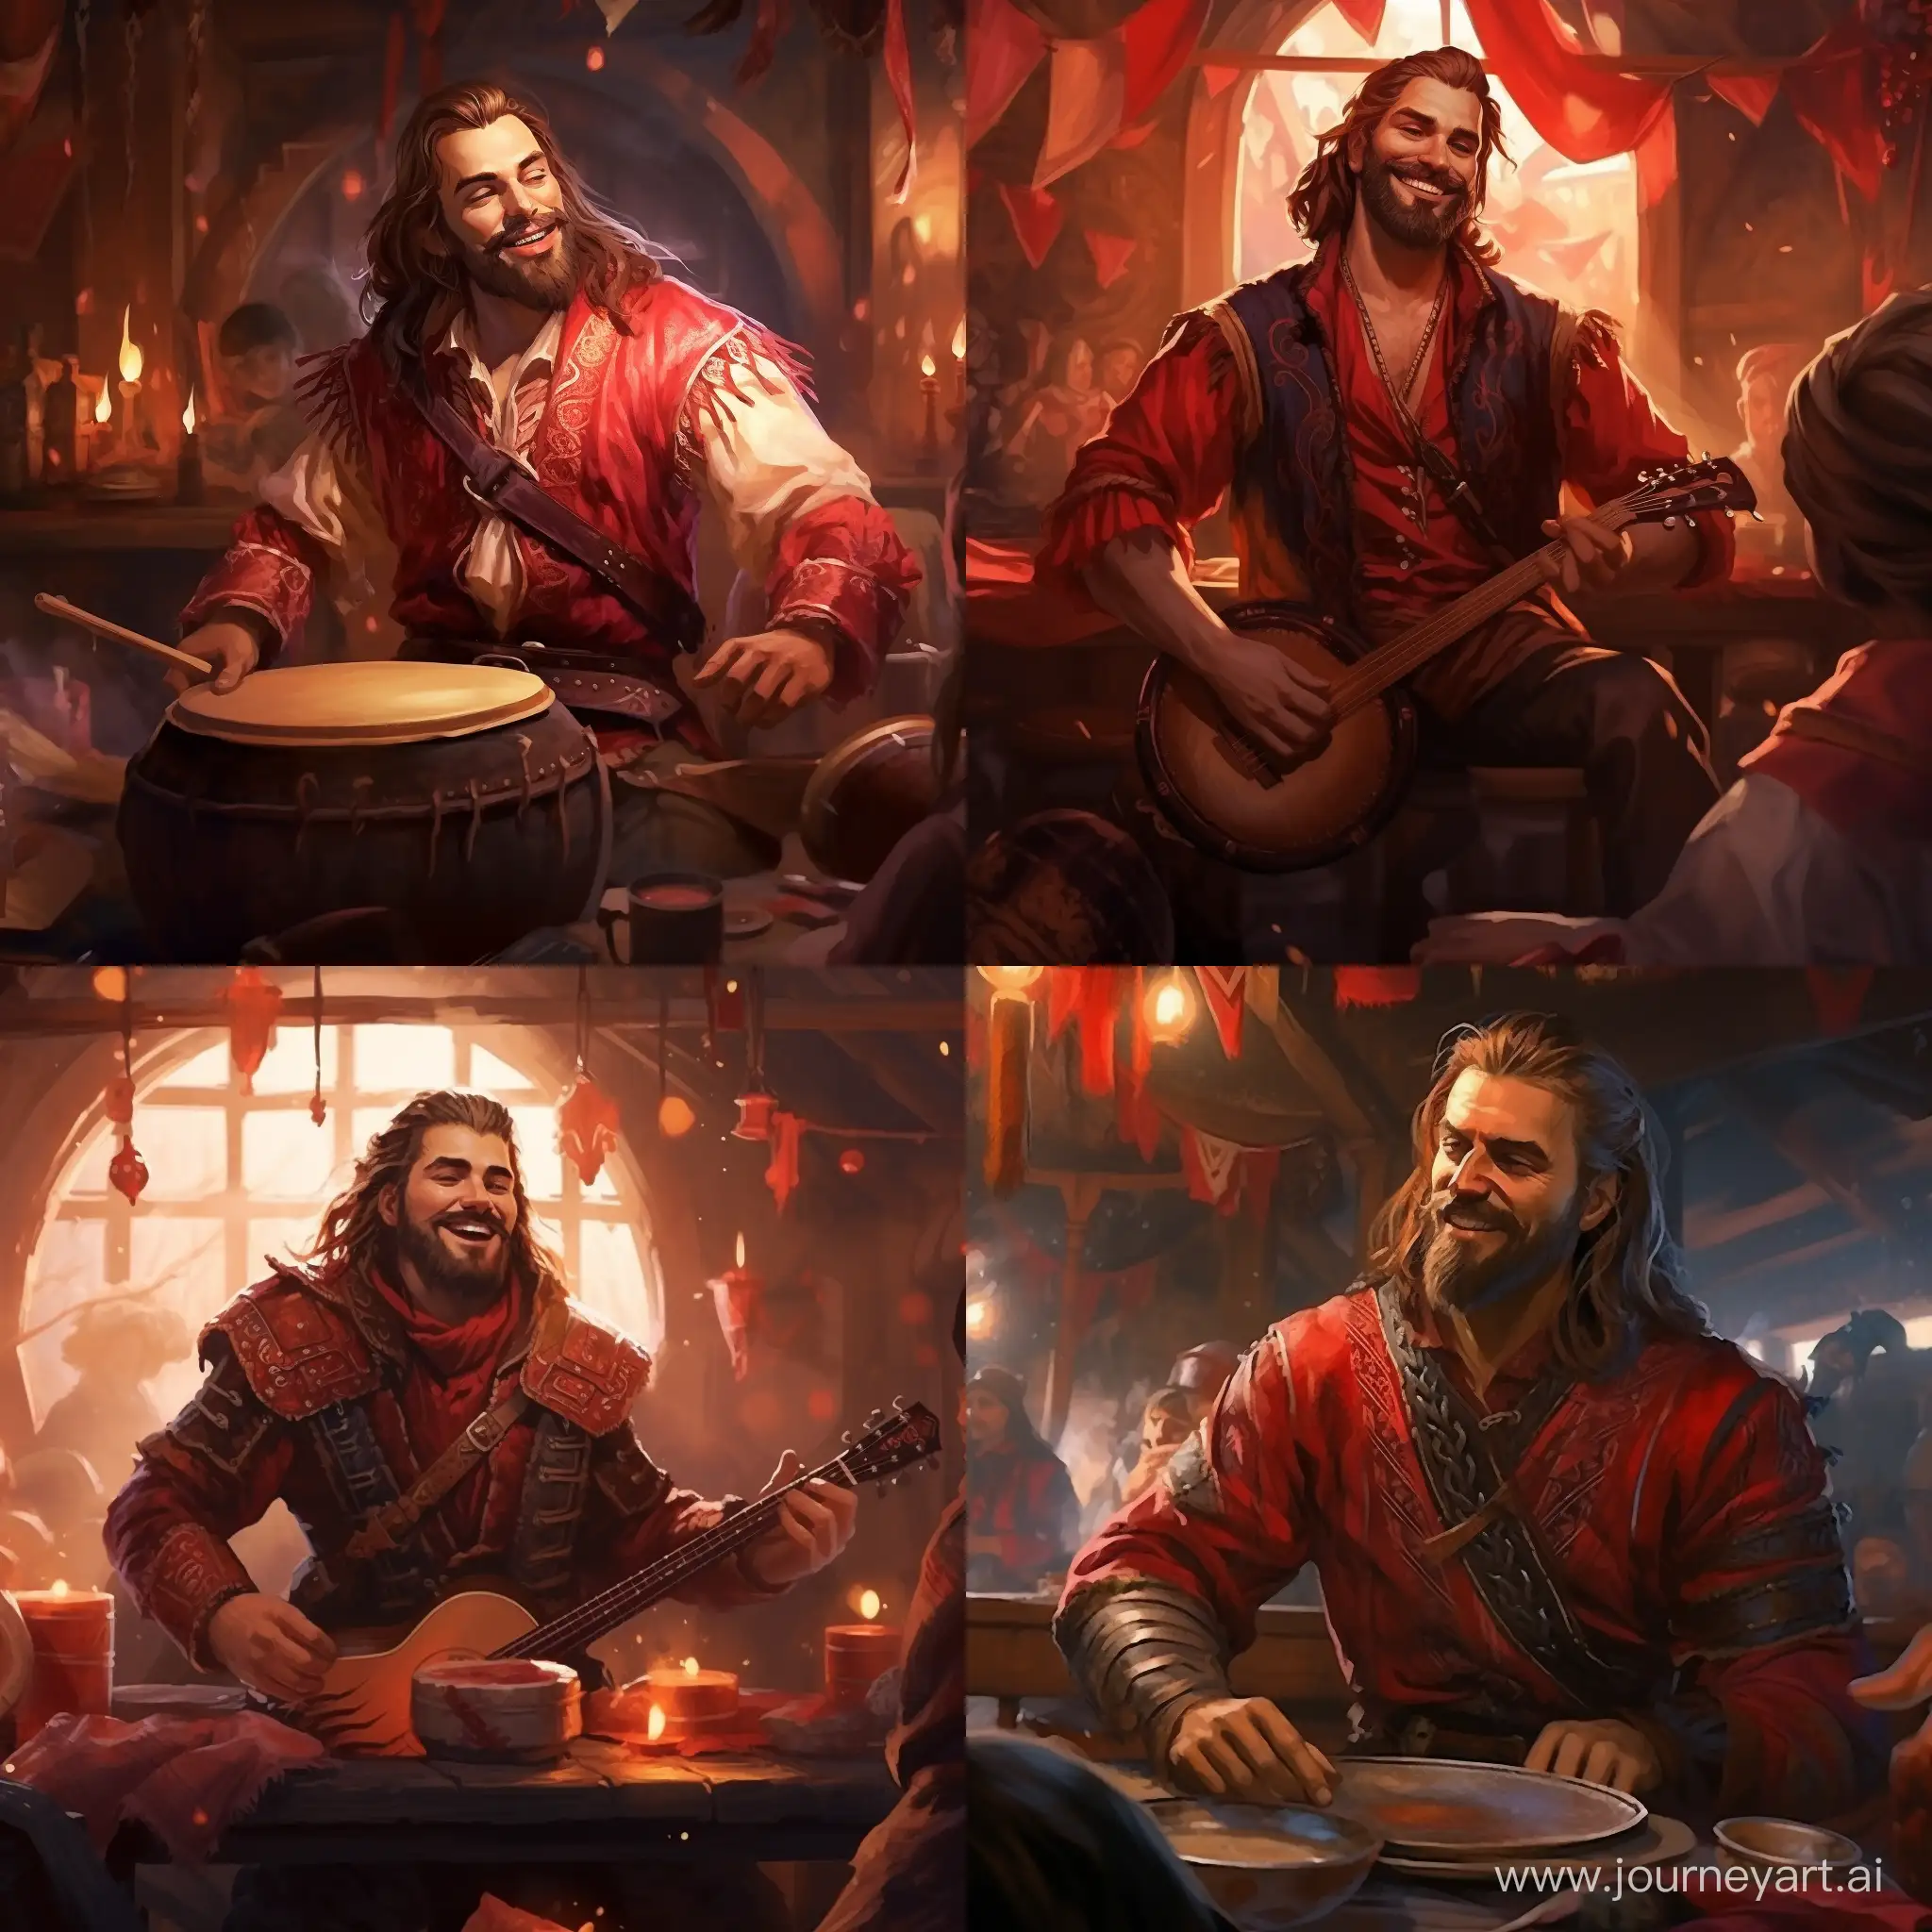 Vibrant-Viking-Bard-Performing-a-Feast-Song-in-Red-Attire